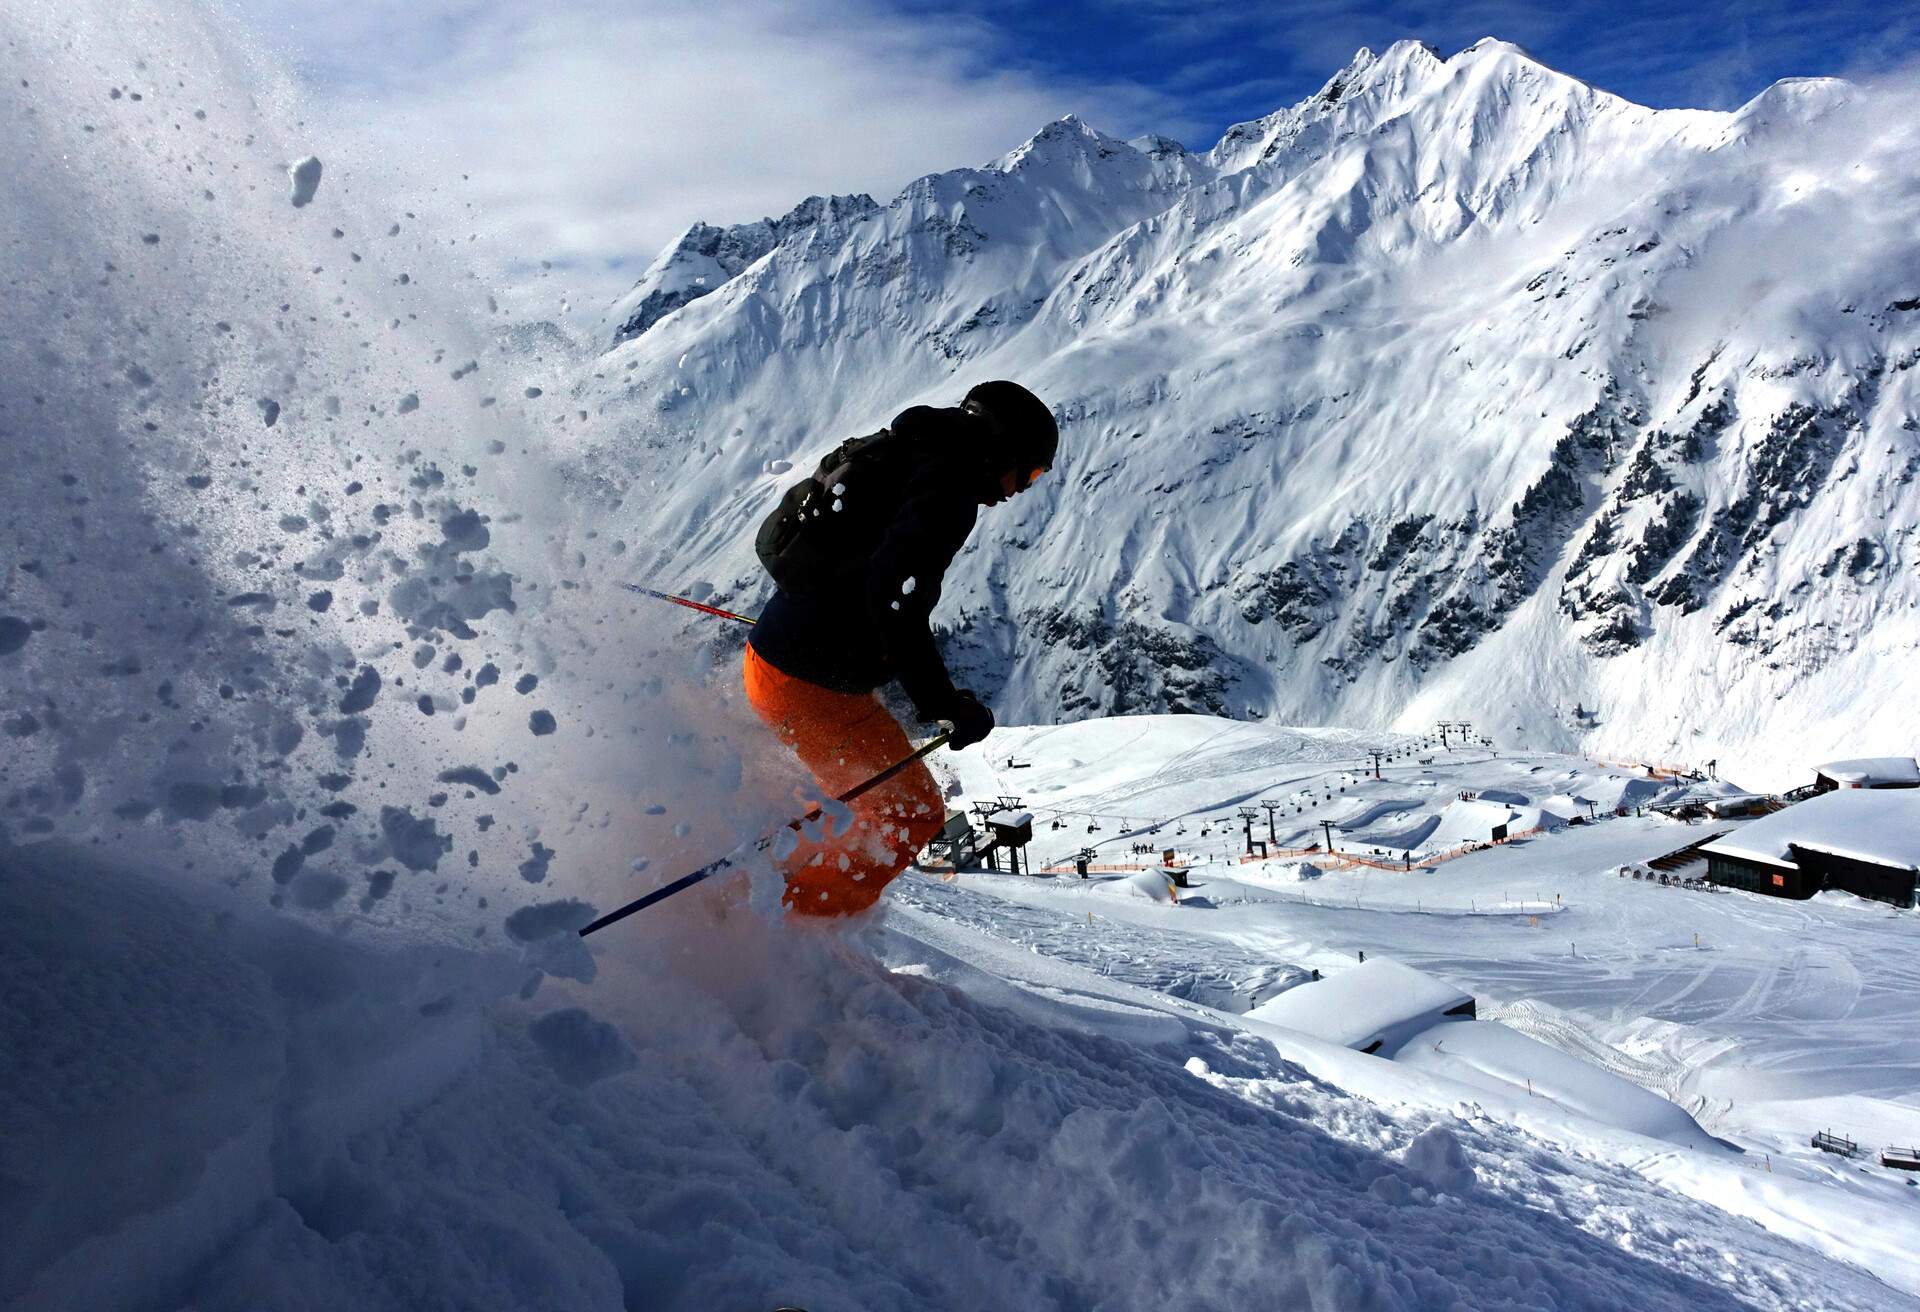 A skier slides down the snow-covered terrain with powdery snow behind and views of snow-covered mountains.